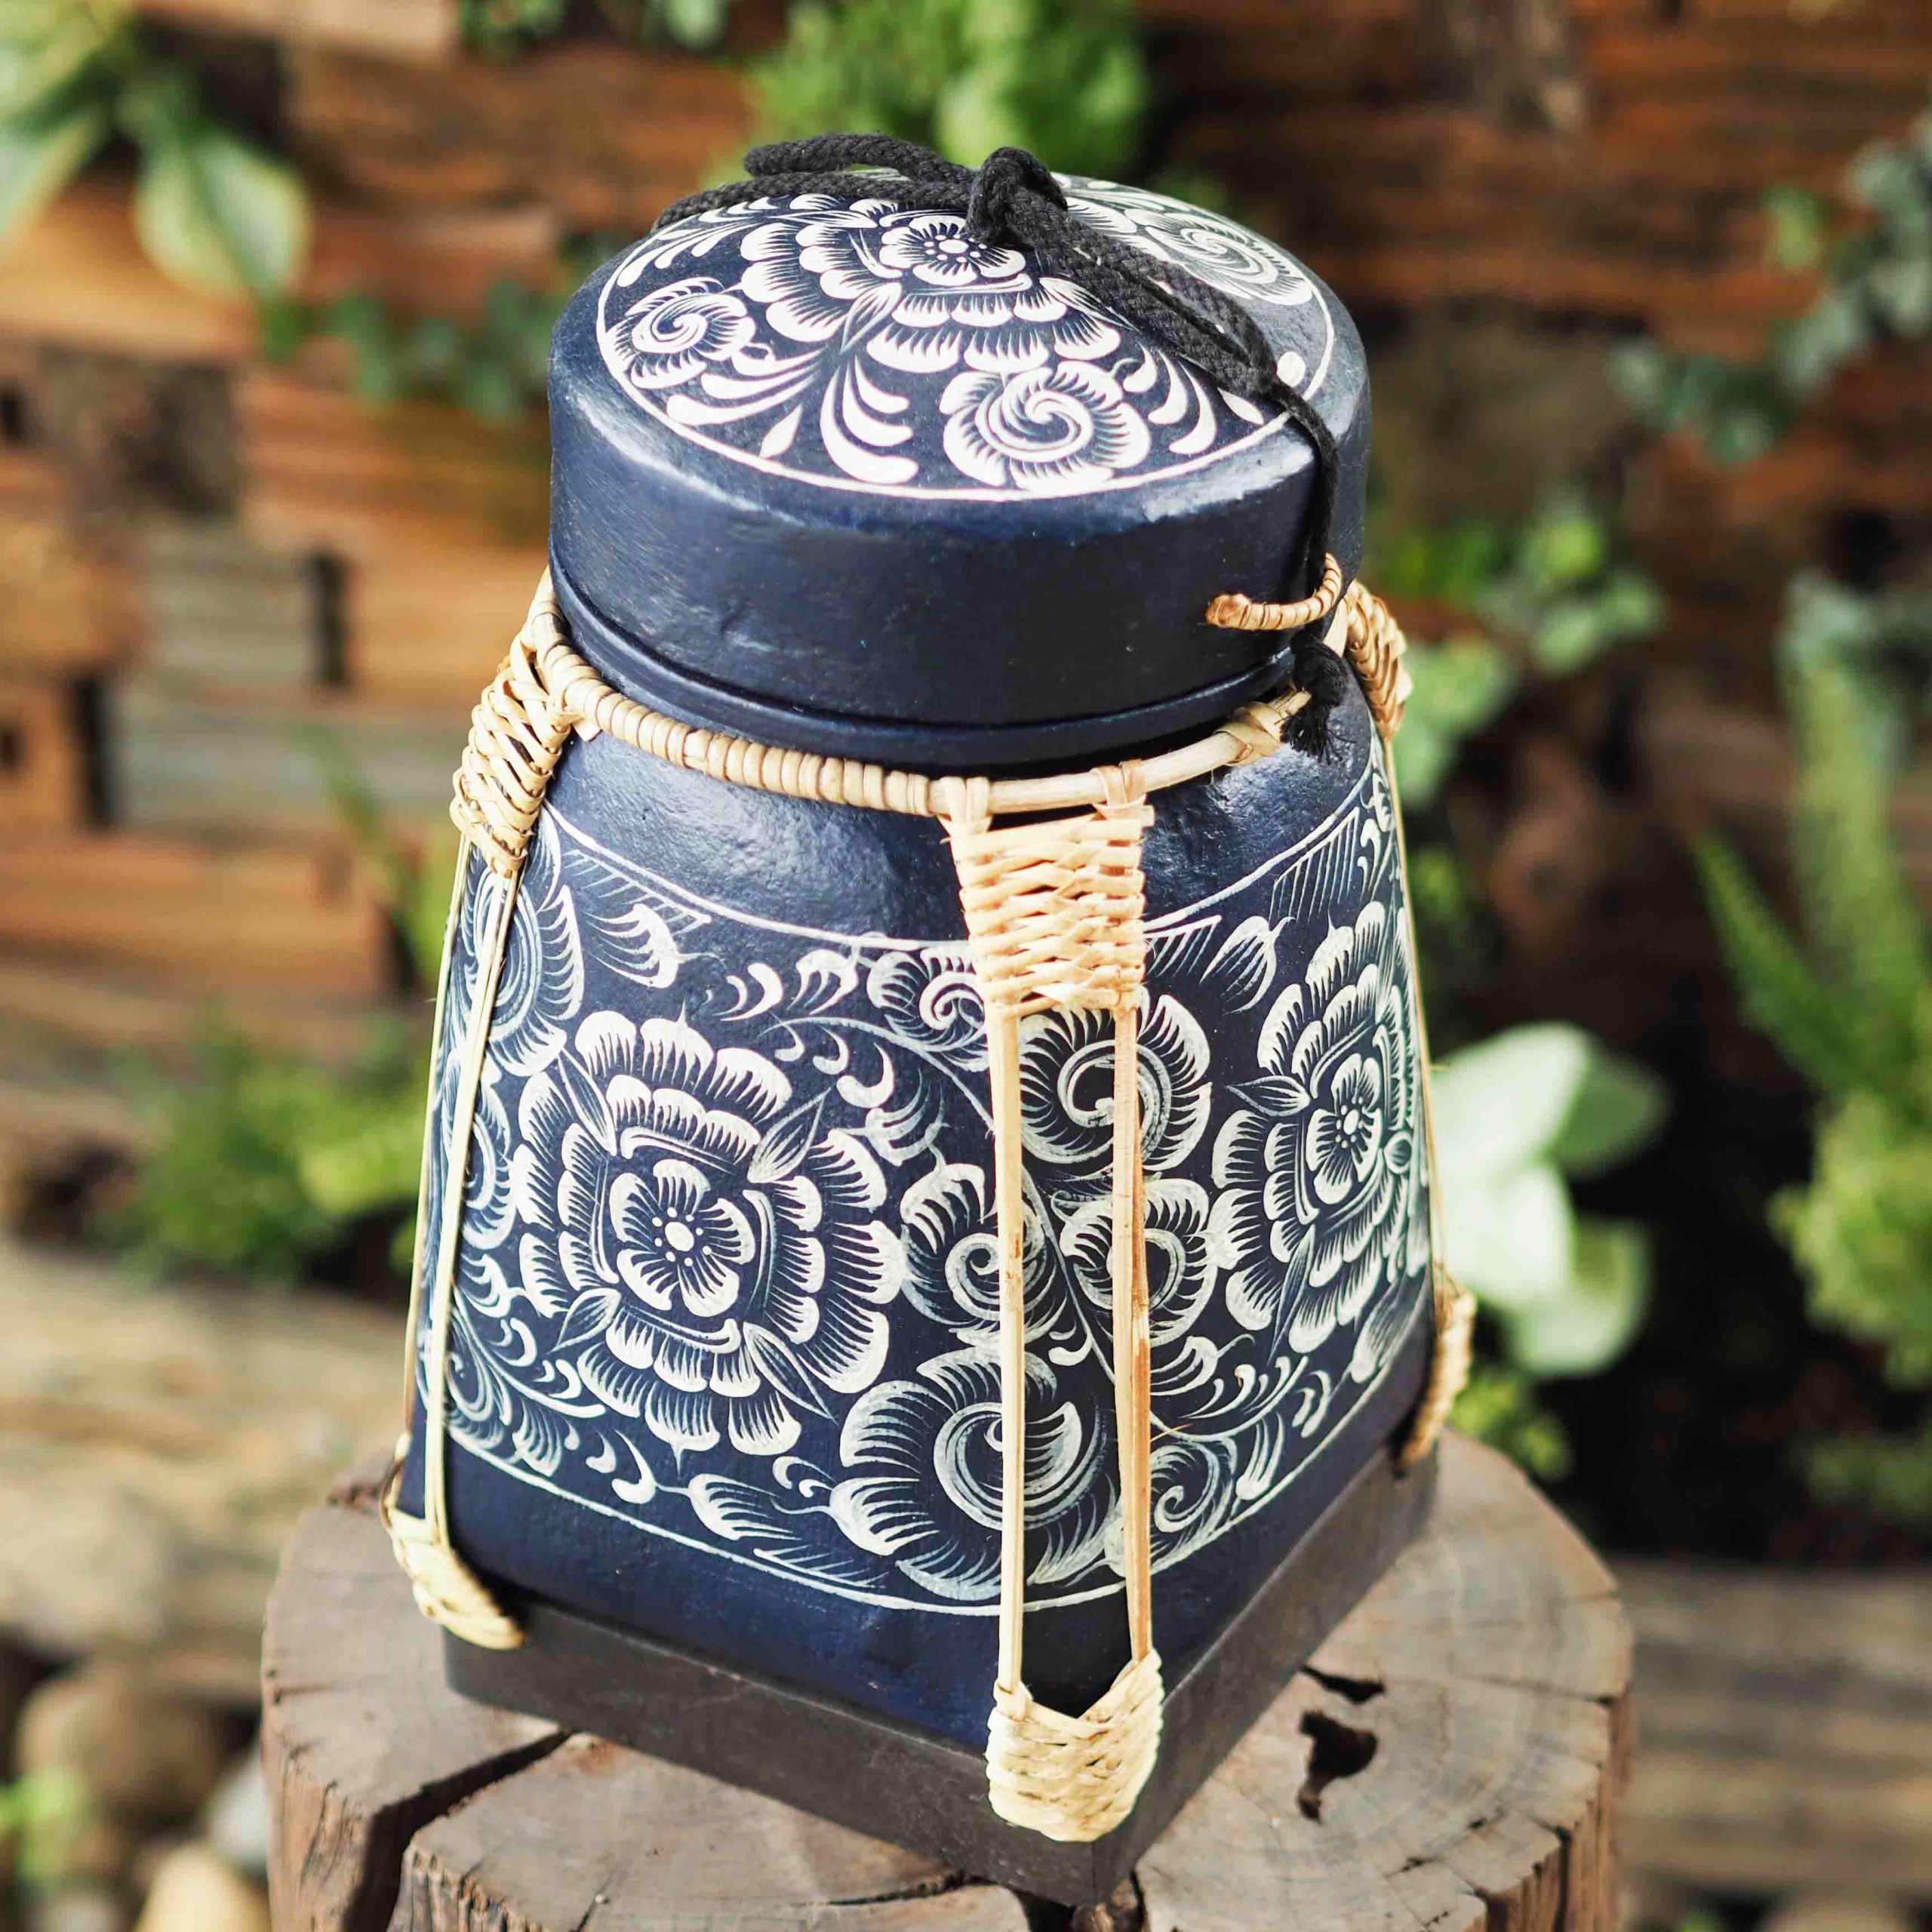 https://www.siamsawadee.com/wp-content/uploads/2018/02/Rice-Storage-Basket-Decorative-Traditional-Handmade-Bamboo-Container-With-Lid-From-Thailand-scaled.jpg